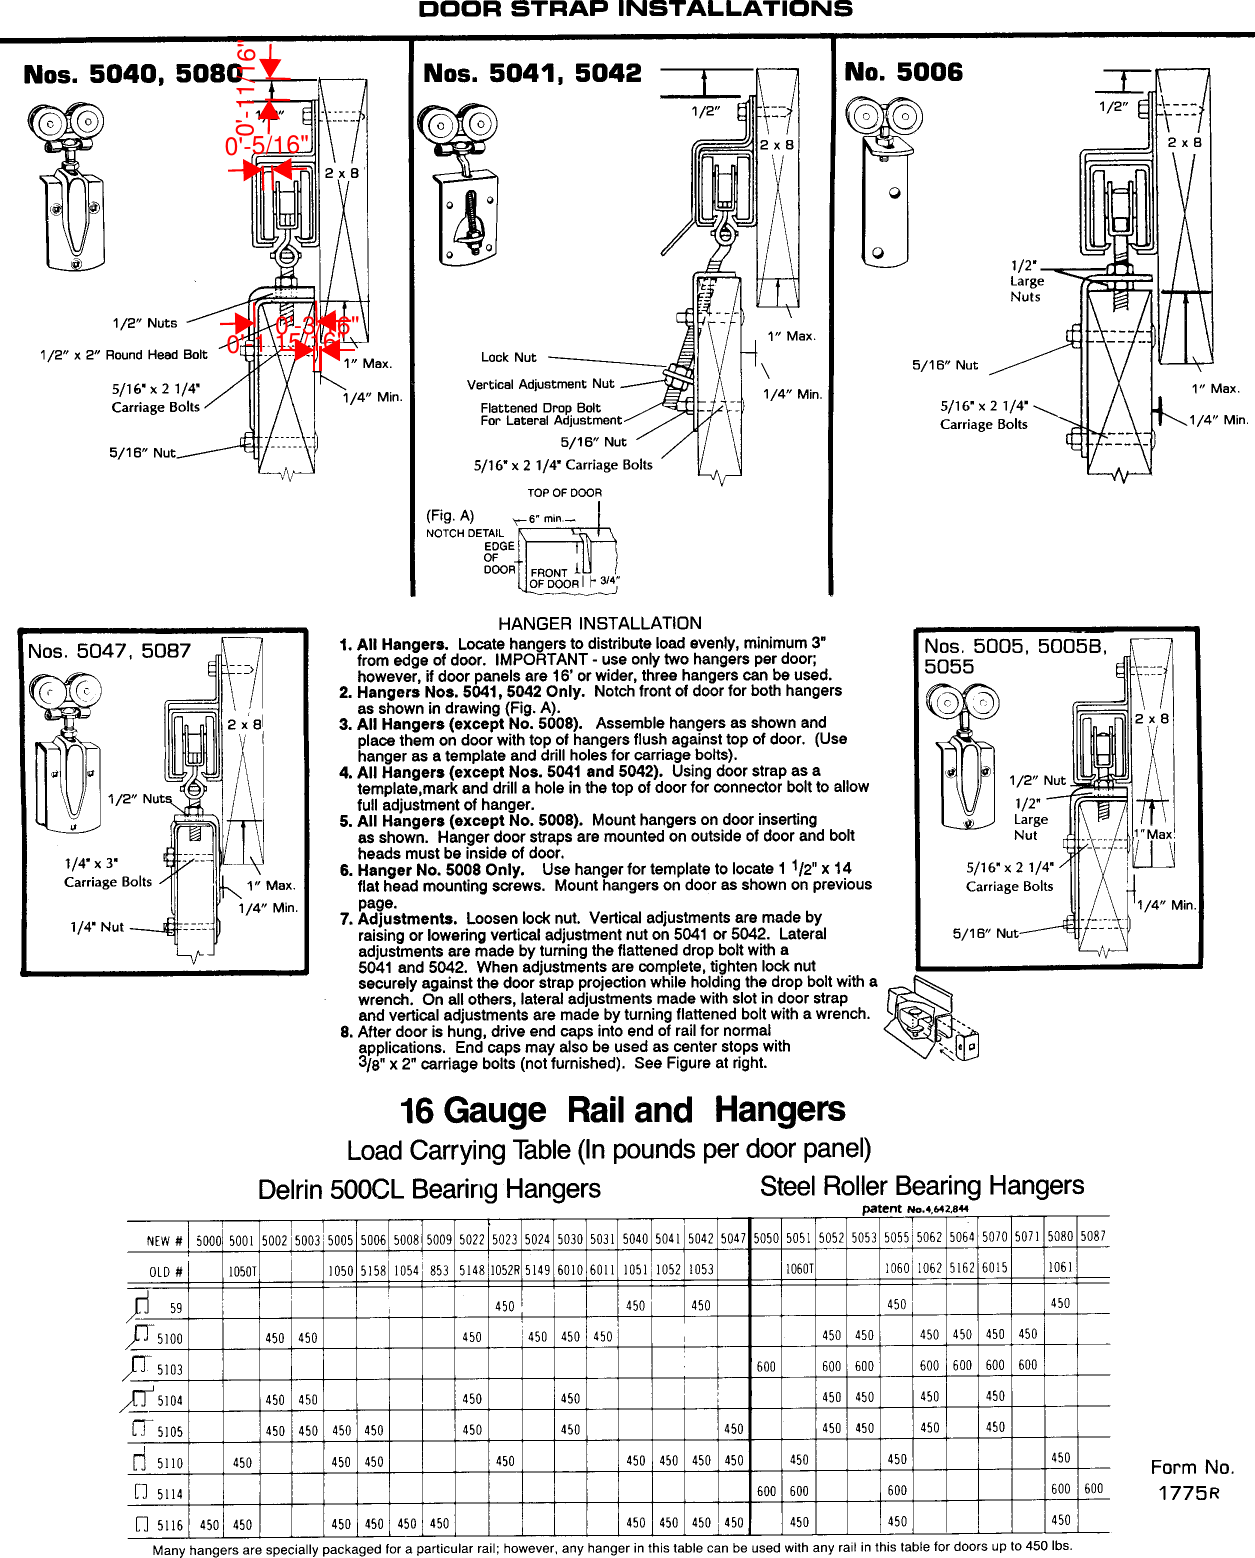 Page 3 of 3 - 5005-box-rail-hangers Instructions